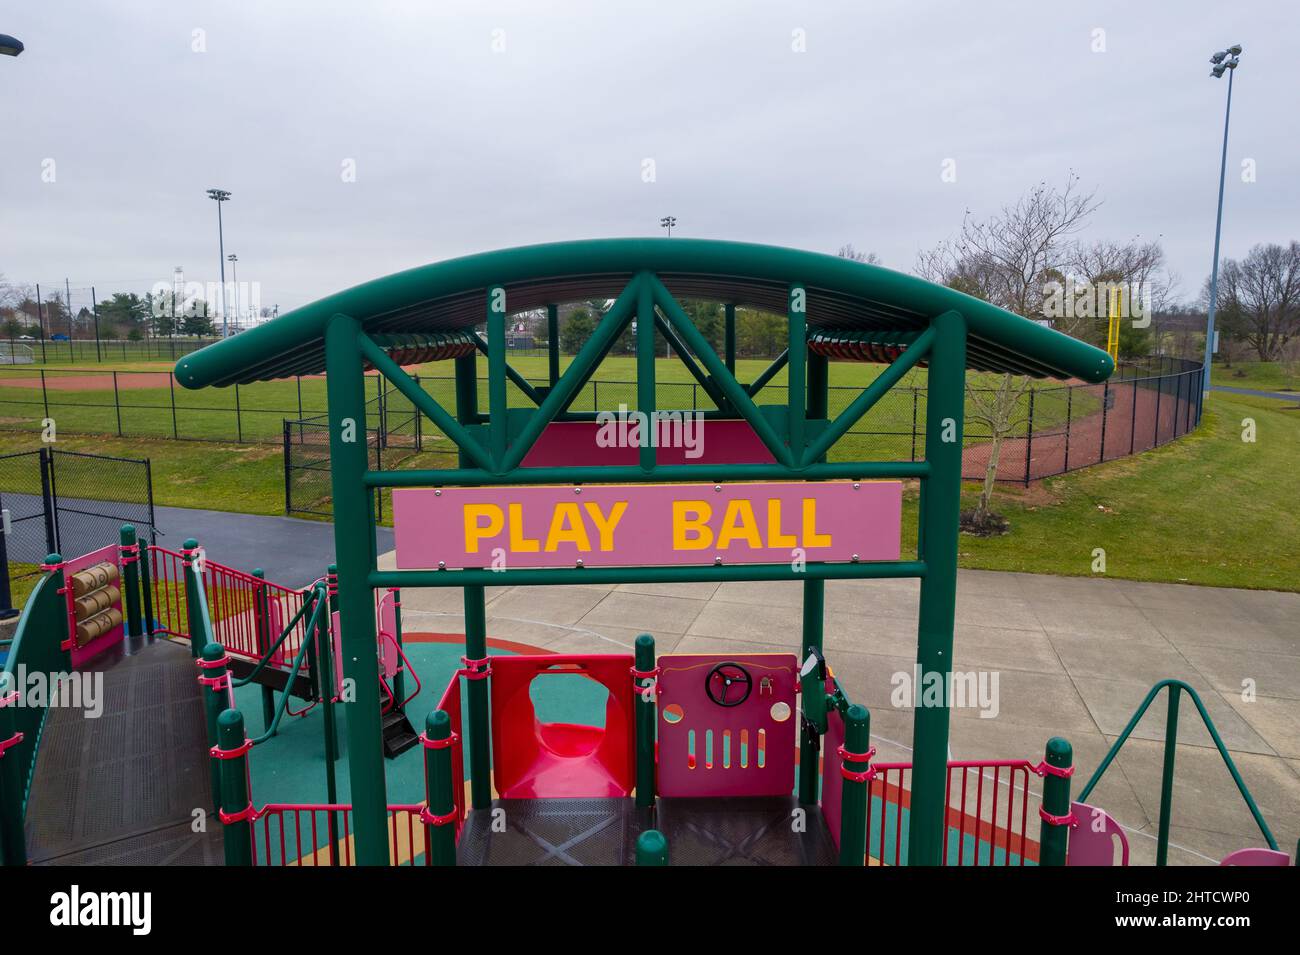 View of children's playground with a sign saying 'Play Ball' and a game field on the background Stock Photo